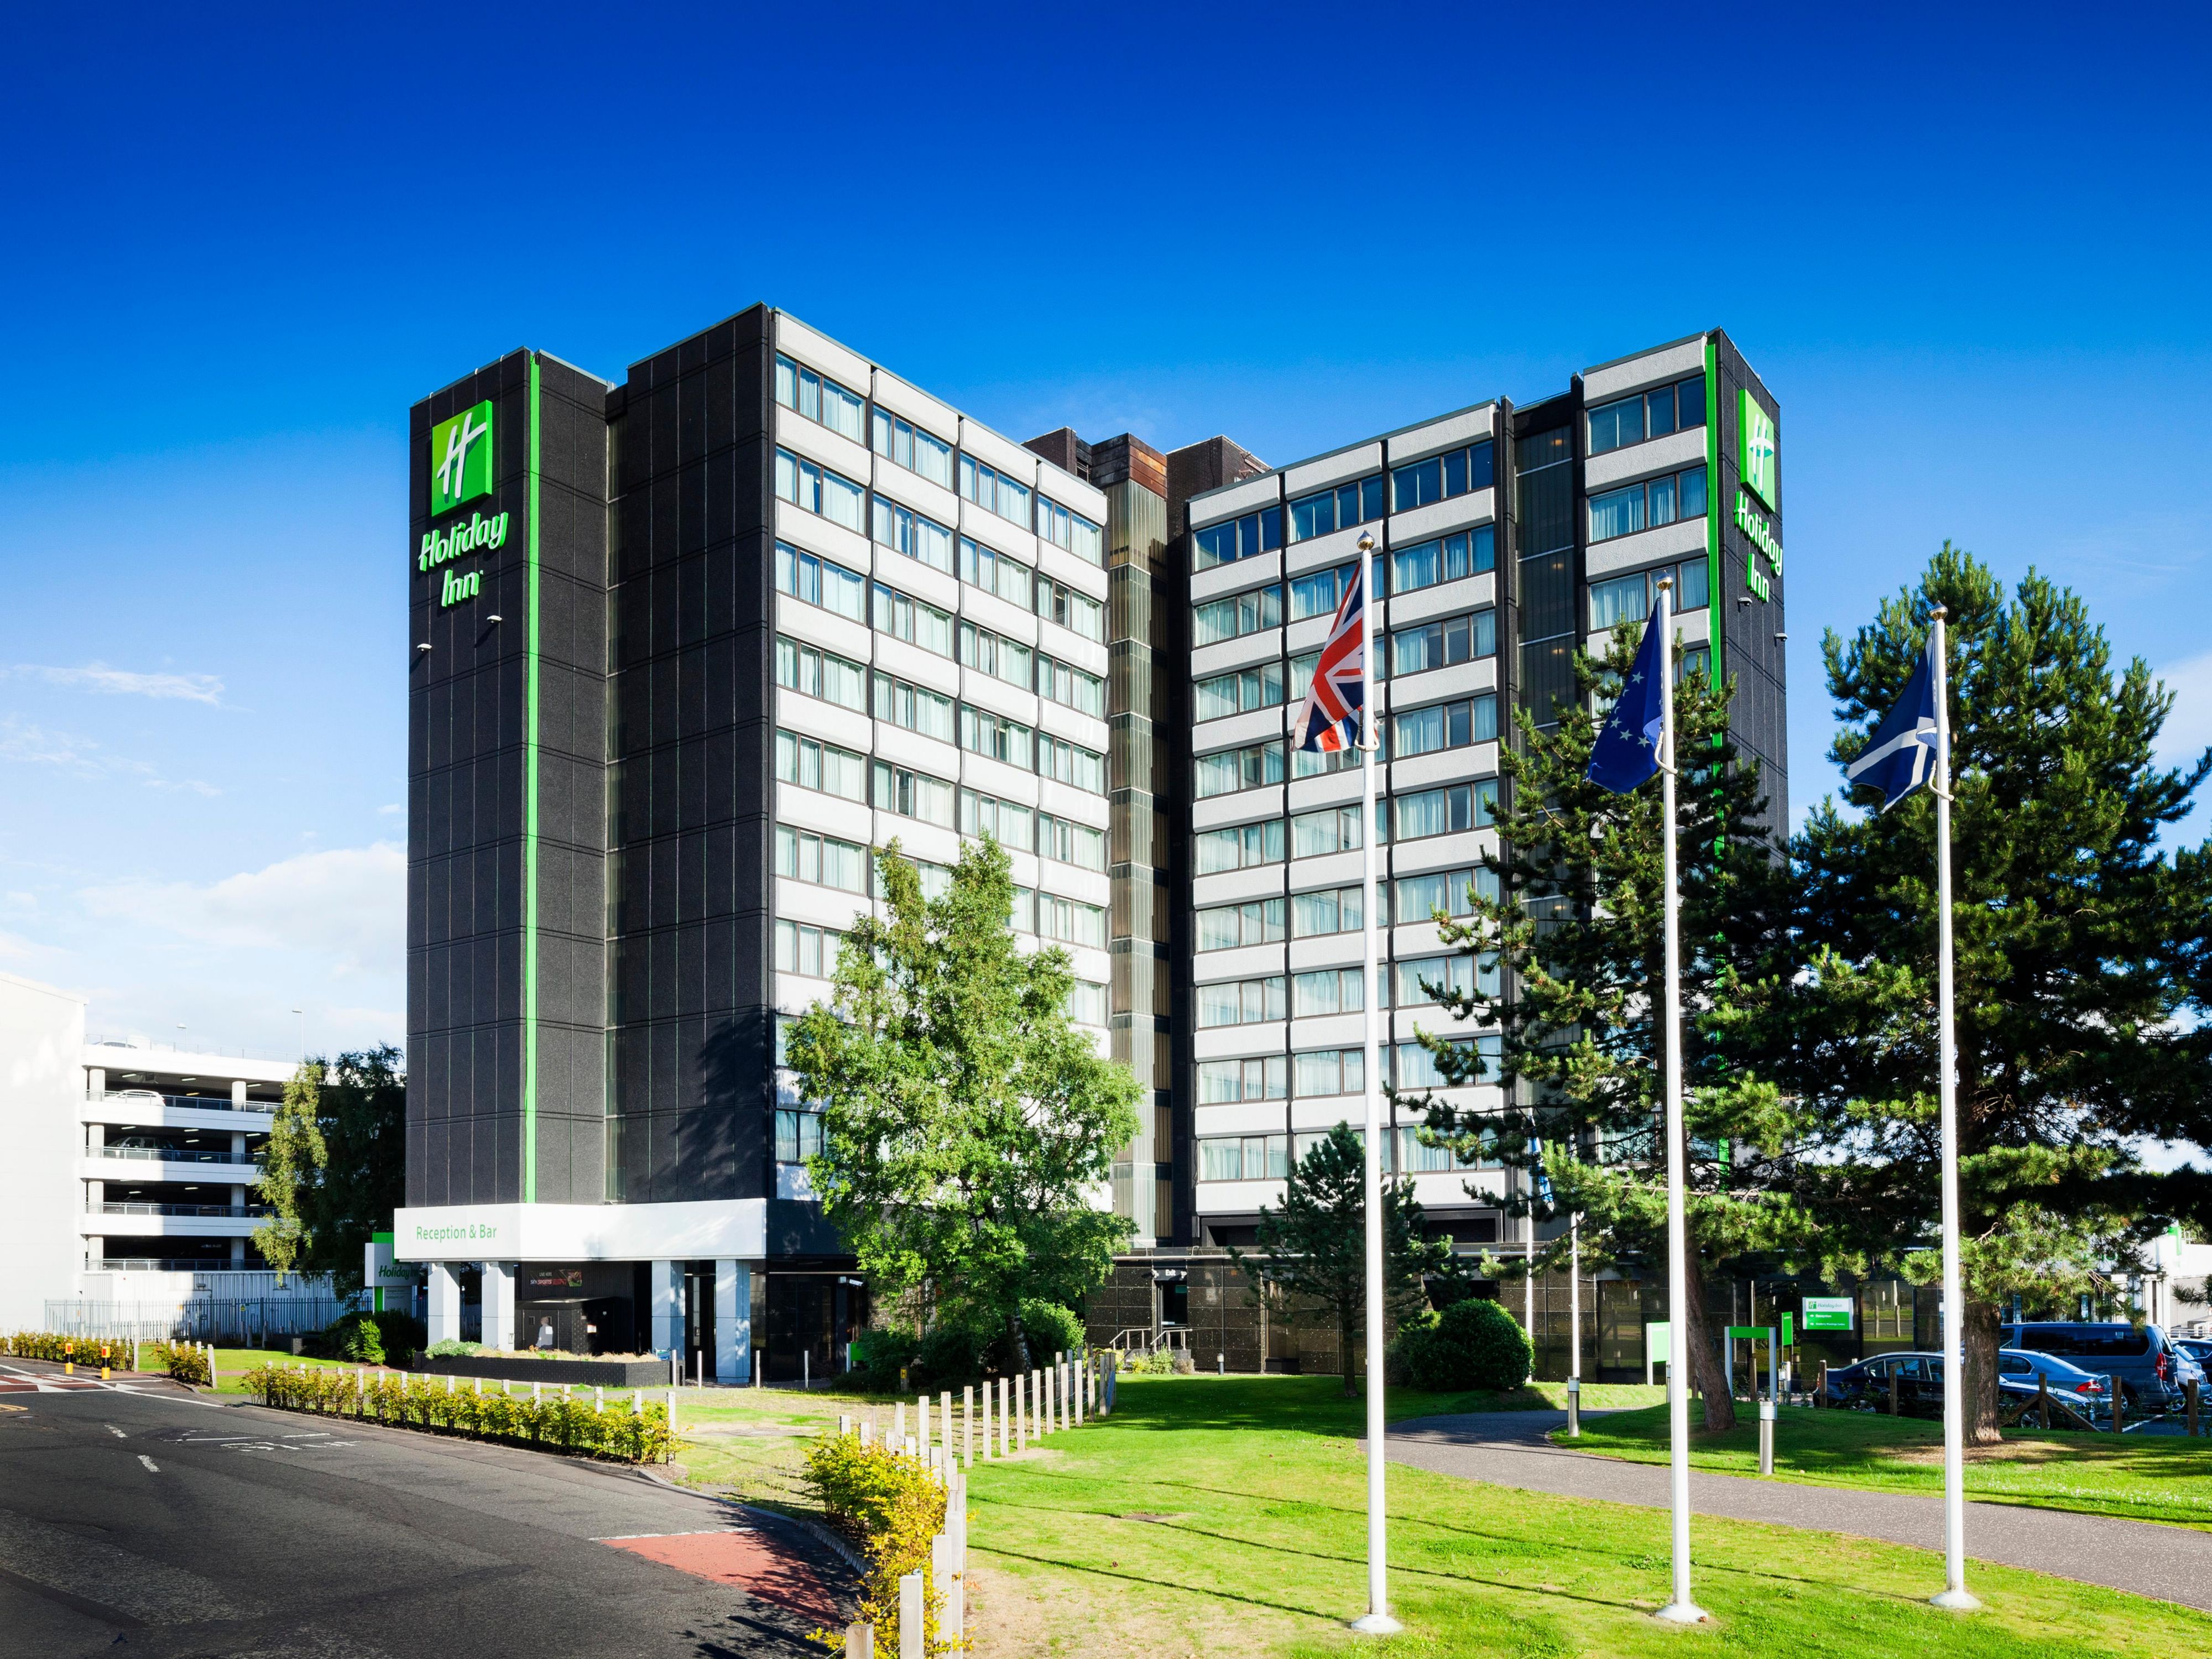 Just click on the link for a chance to visit the Holiday Inn Glasgow Airport virtually with a fully interactive virtual tour. Move through the hotel exploring the open lobby, restaurant, meeting and event spaces, and bedrooms.